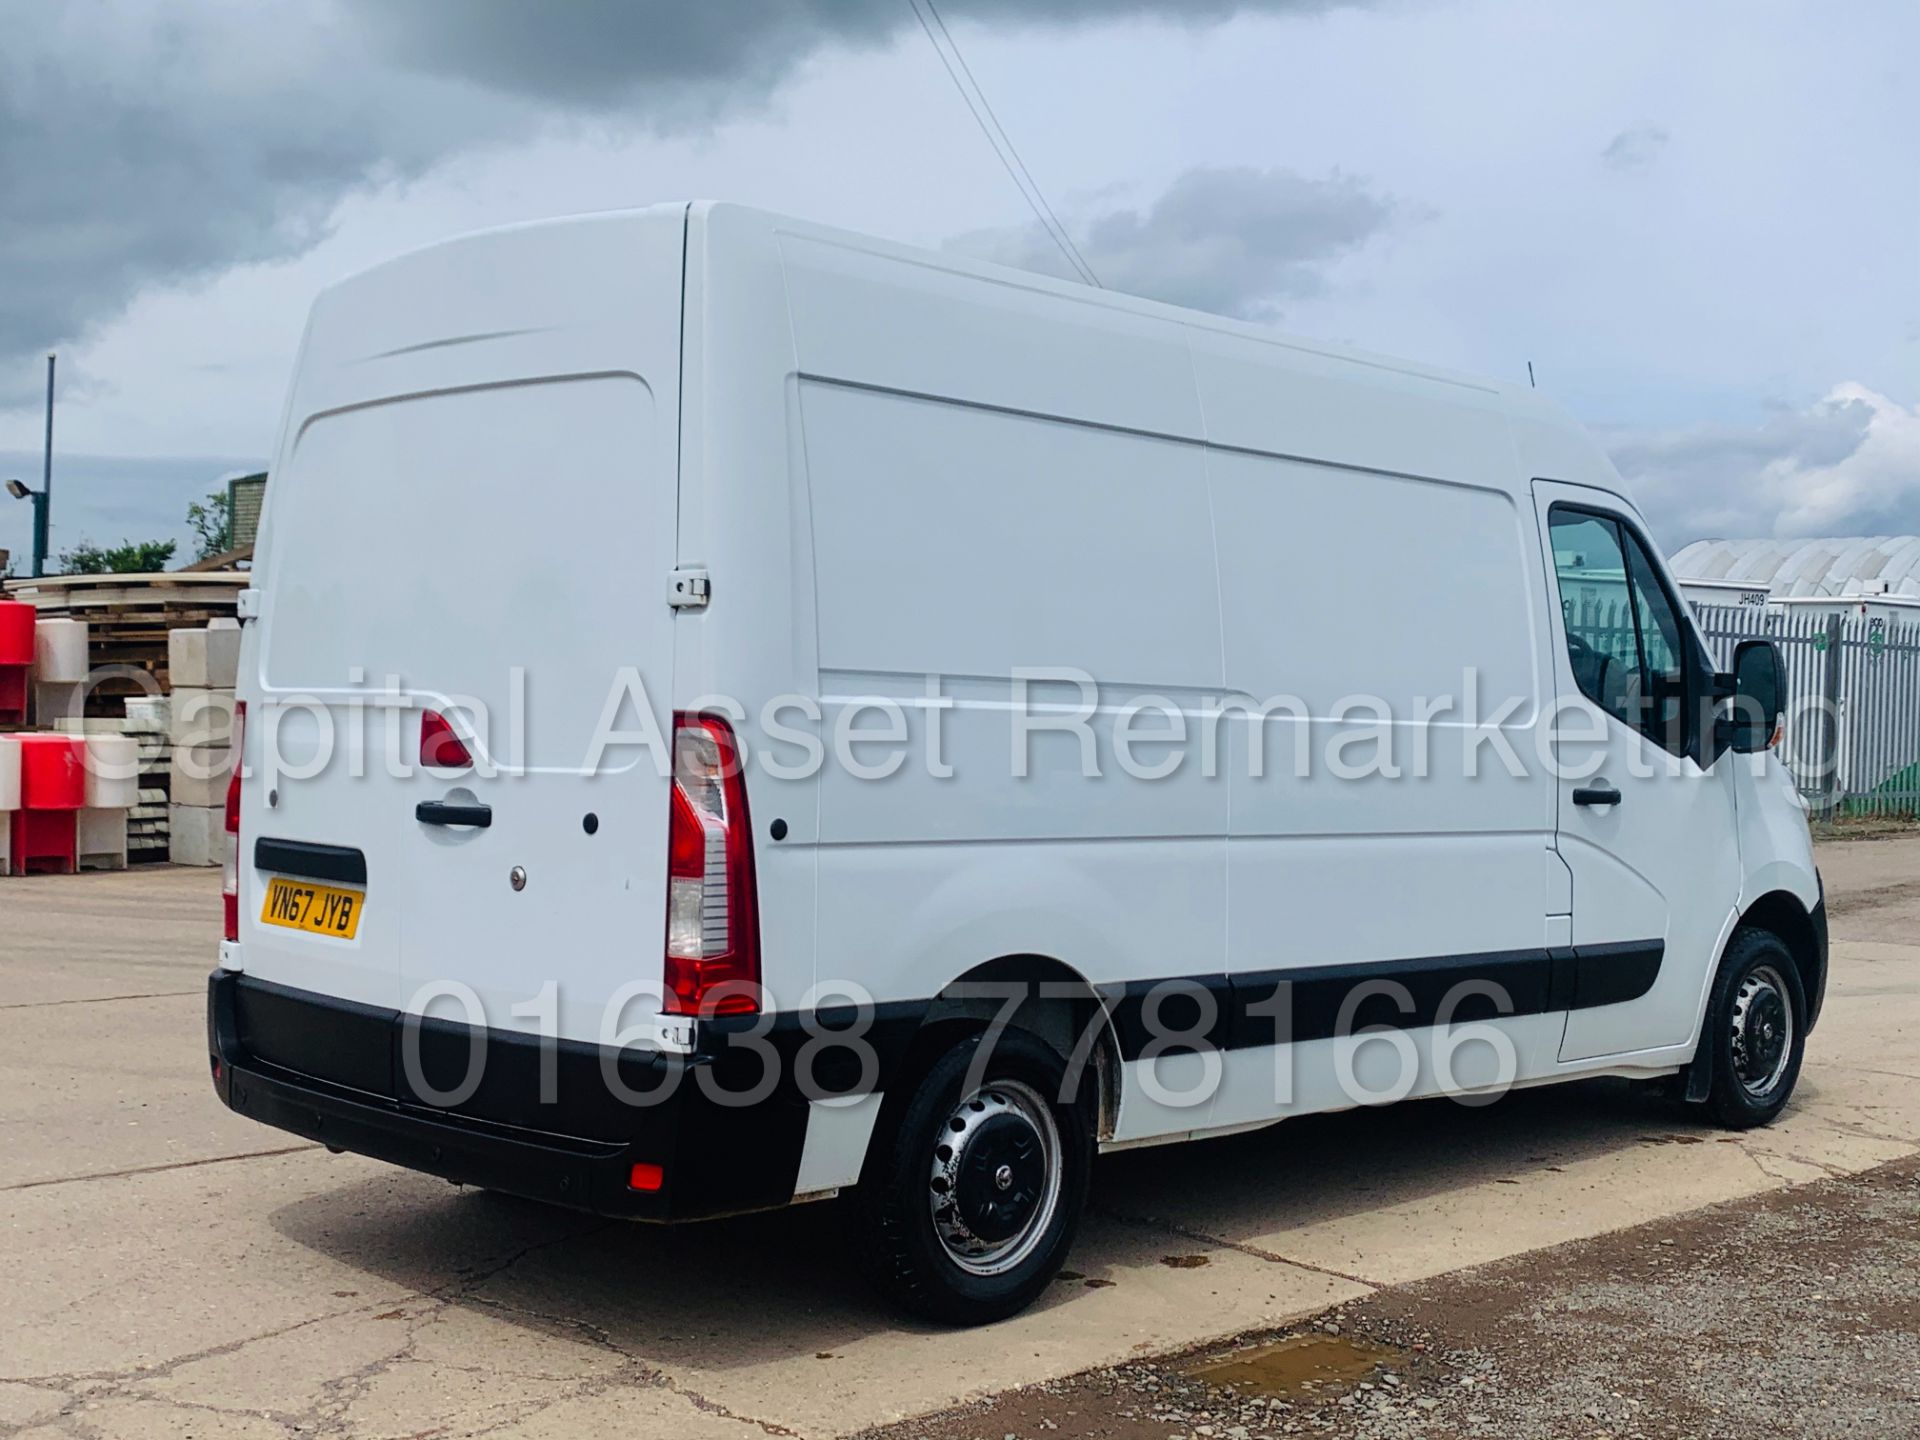 (ON SALE) VAUXHALL MOVANO *MWB HI-ROOF* (2018 - EURO 6) '2.3 CDTI - 130 BHP - 6 SPEED' (1 OWNER) - Image 13 of 39